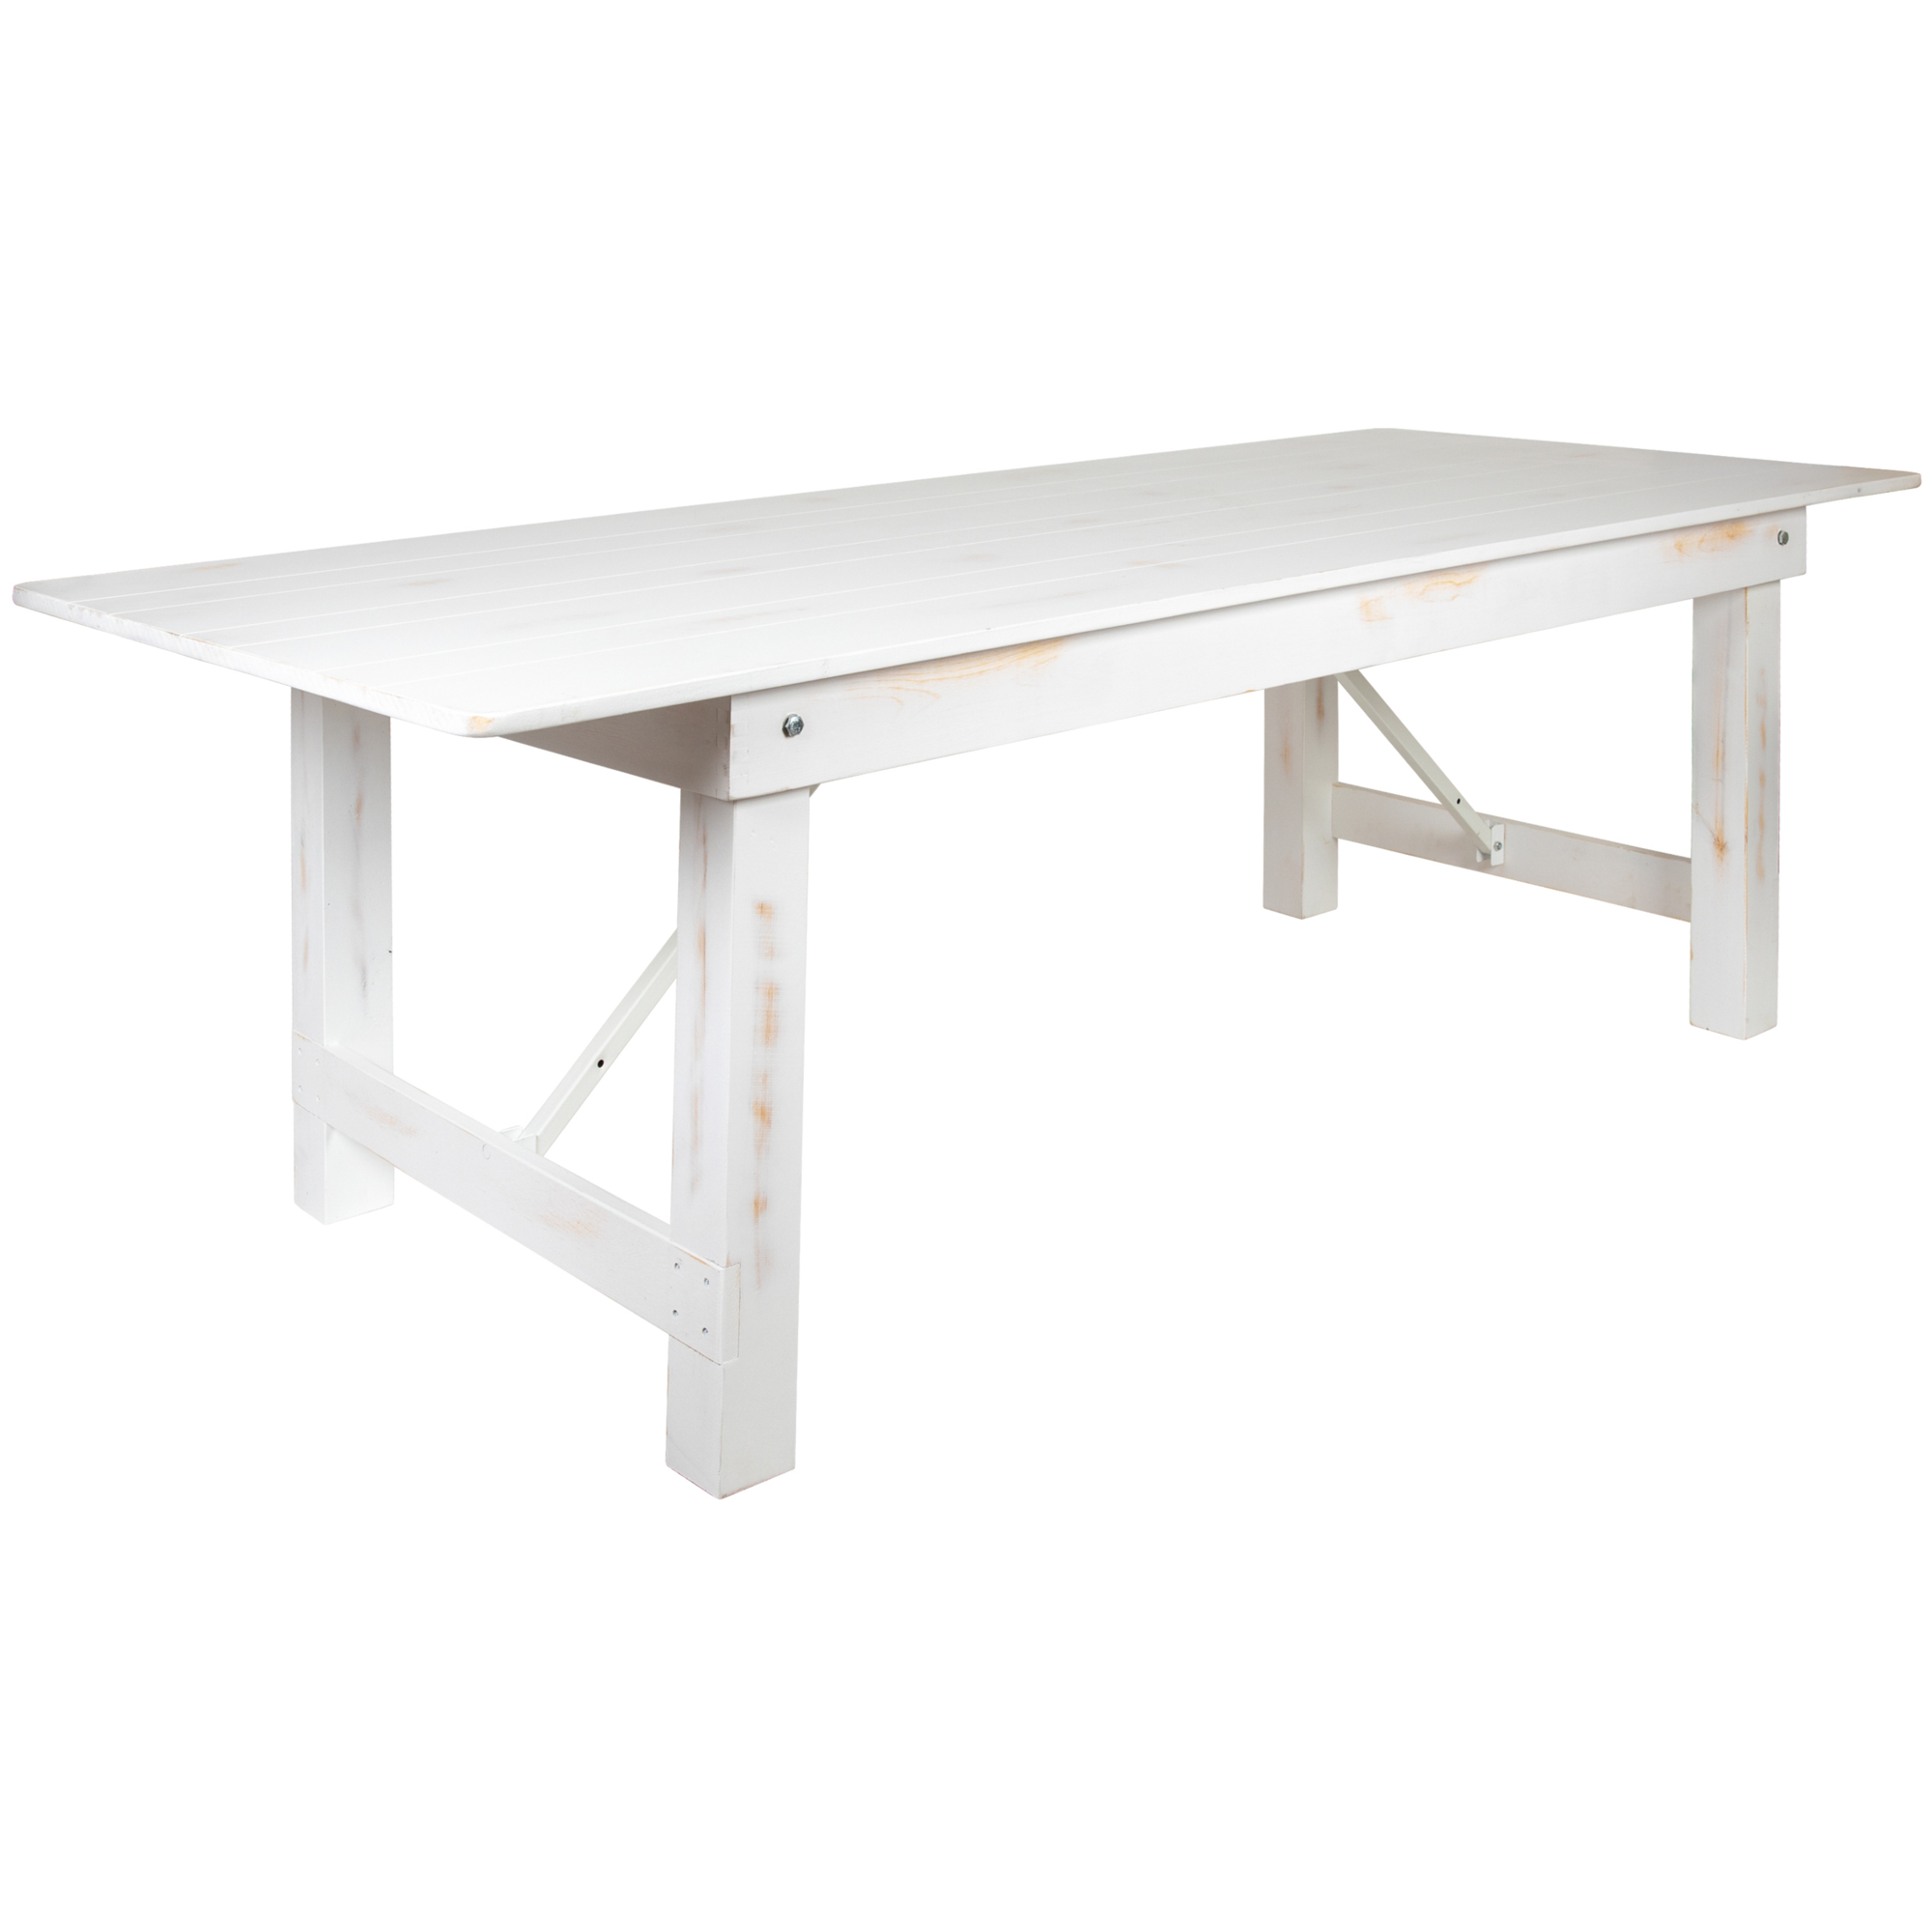 Flash Furniture, 8ft.x40Inch Rustic White Solid Pine Folding Farm Table, Height 29.75 in, Width 40 in, Length 96 in, Model XAF96X40WH